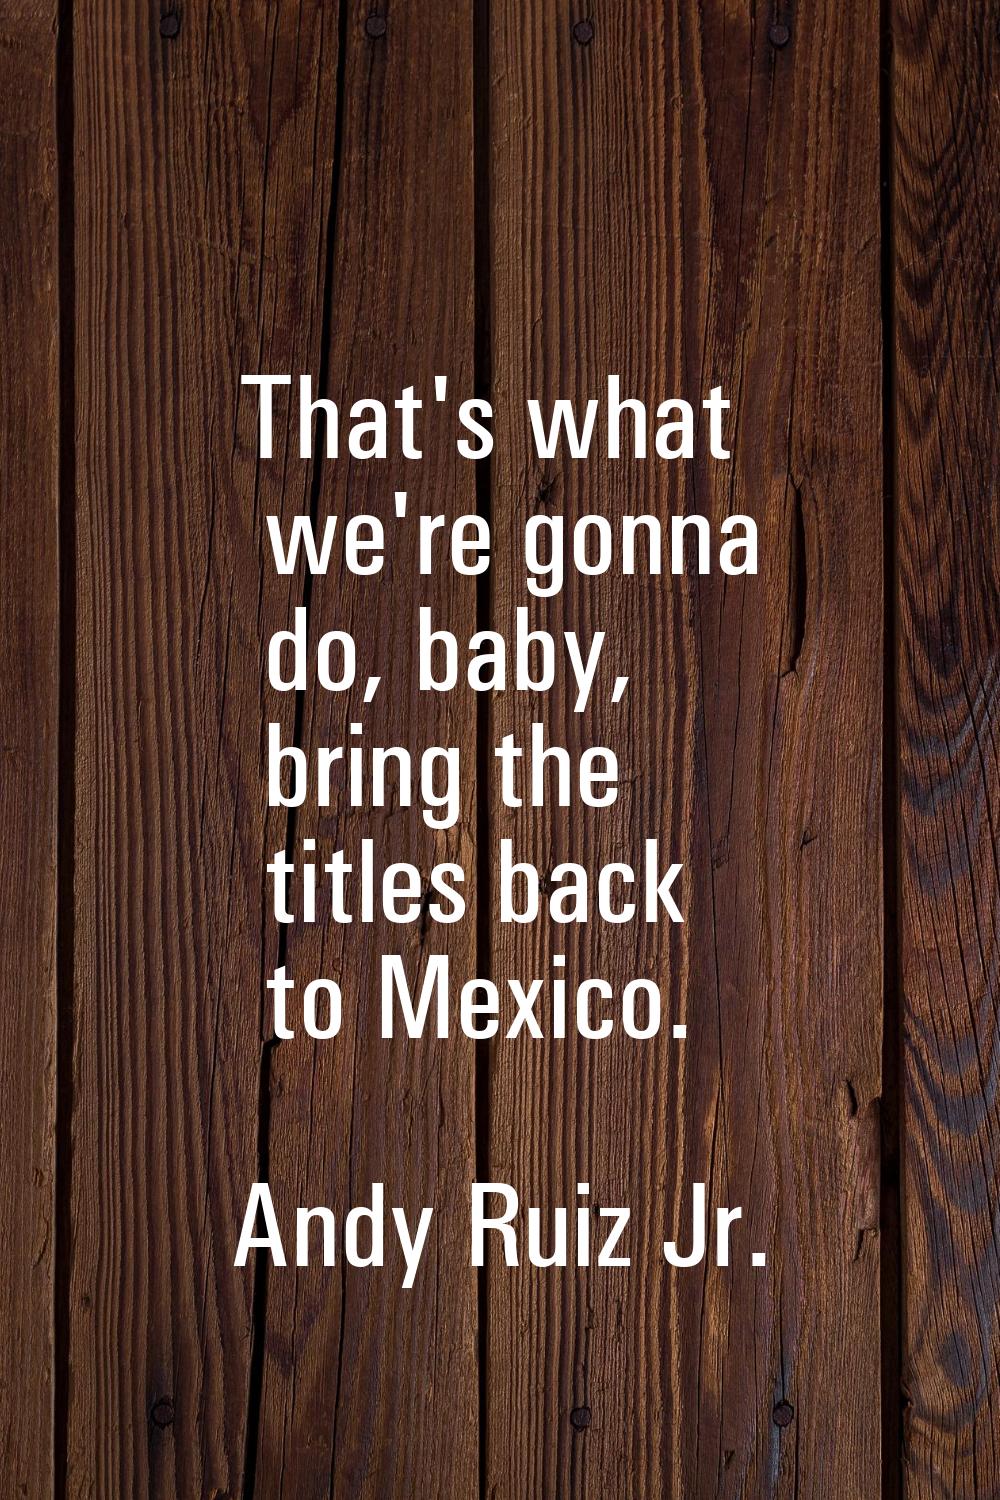 That's what we're gonna do, baby, bring the titles back to Mexico.